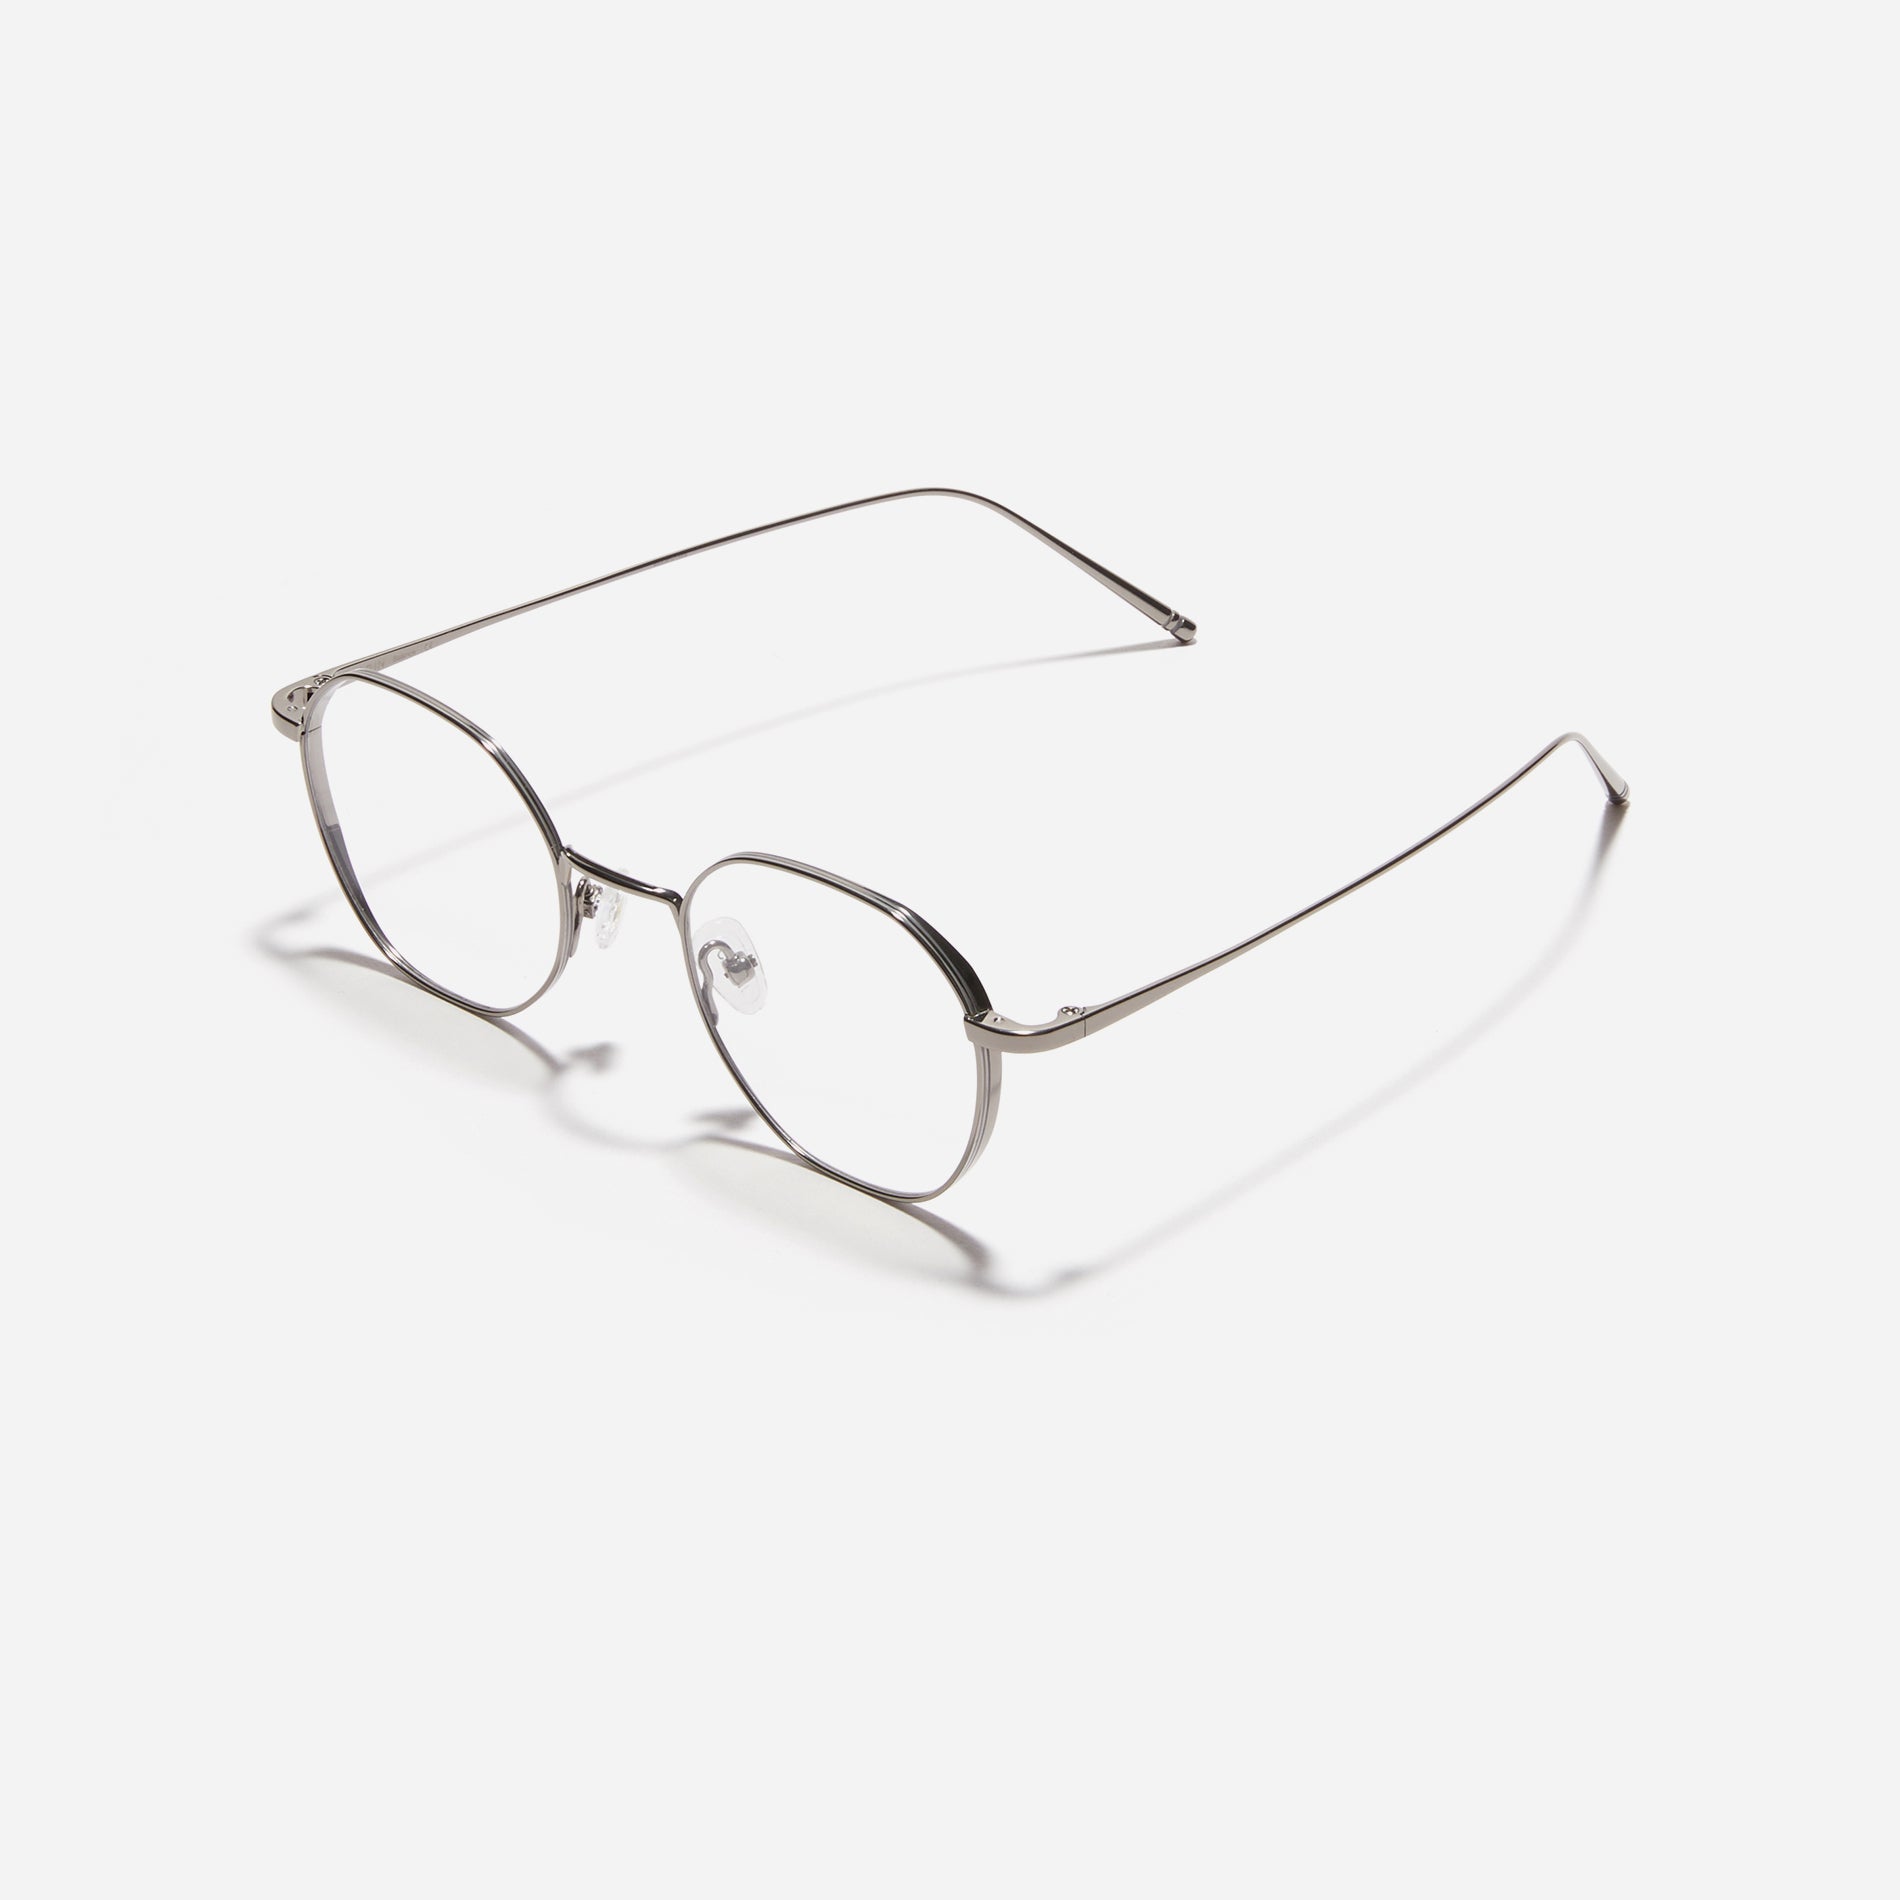 Gus H are hexagonal-shaped, full-metal eyeglasses with a dual-rim structure designed to accommodate thicker, high-prescription lenses. Both the frame and temples are made of pure titanium, ensuring a lightweight and comfortable fit.